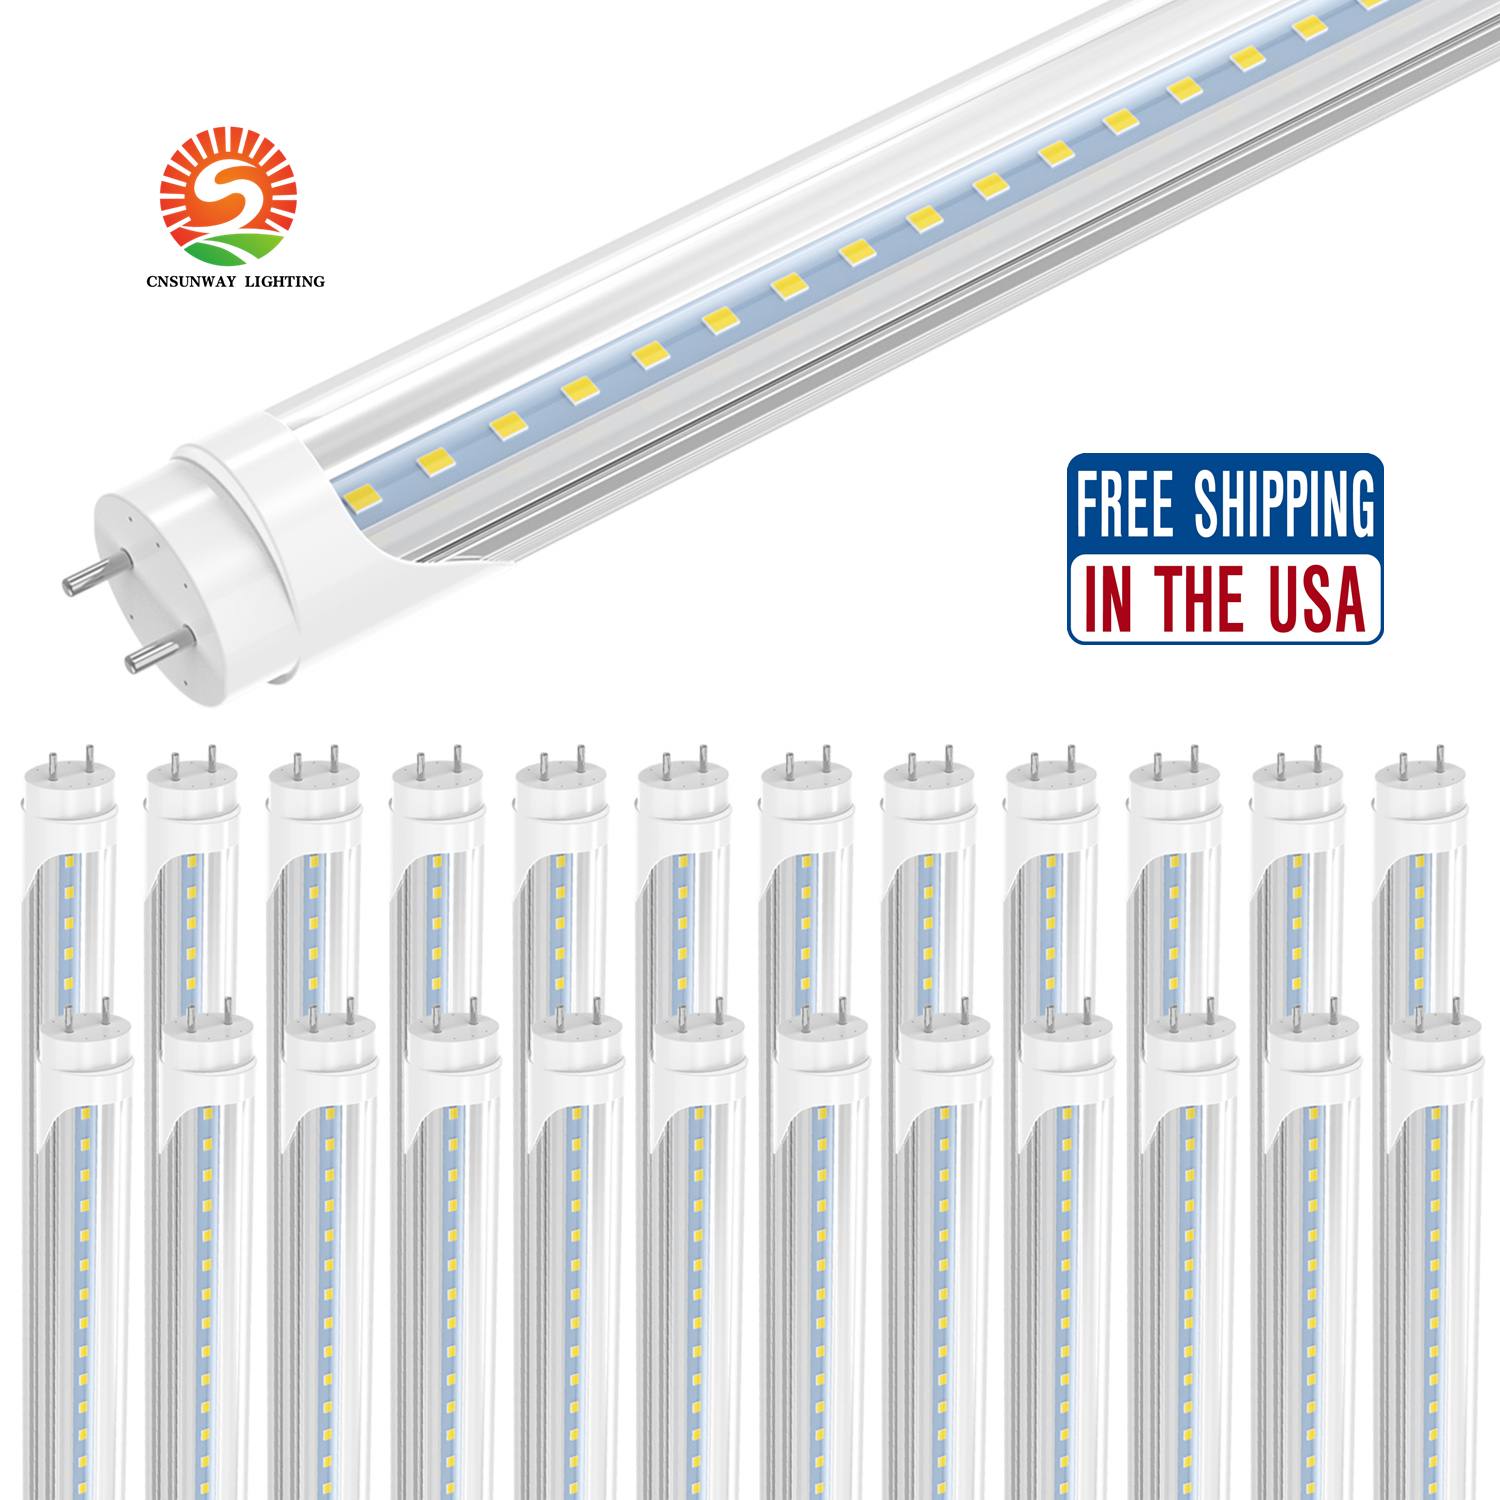 Super Bright 22W 2200lm T8 G13 Led Tube Lights 4ft 1.2m 1200mm Led Lampe Fluorescente AC 110-277V Chaud Naturel Blanc Froid UL